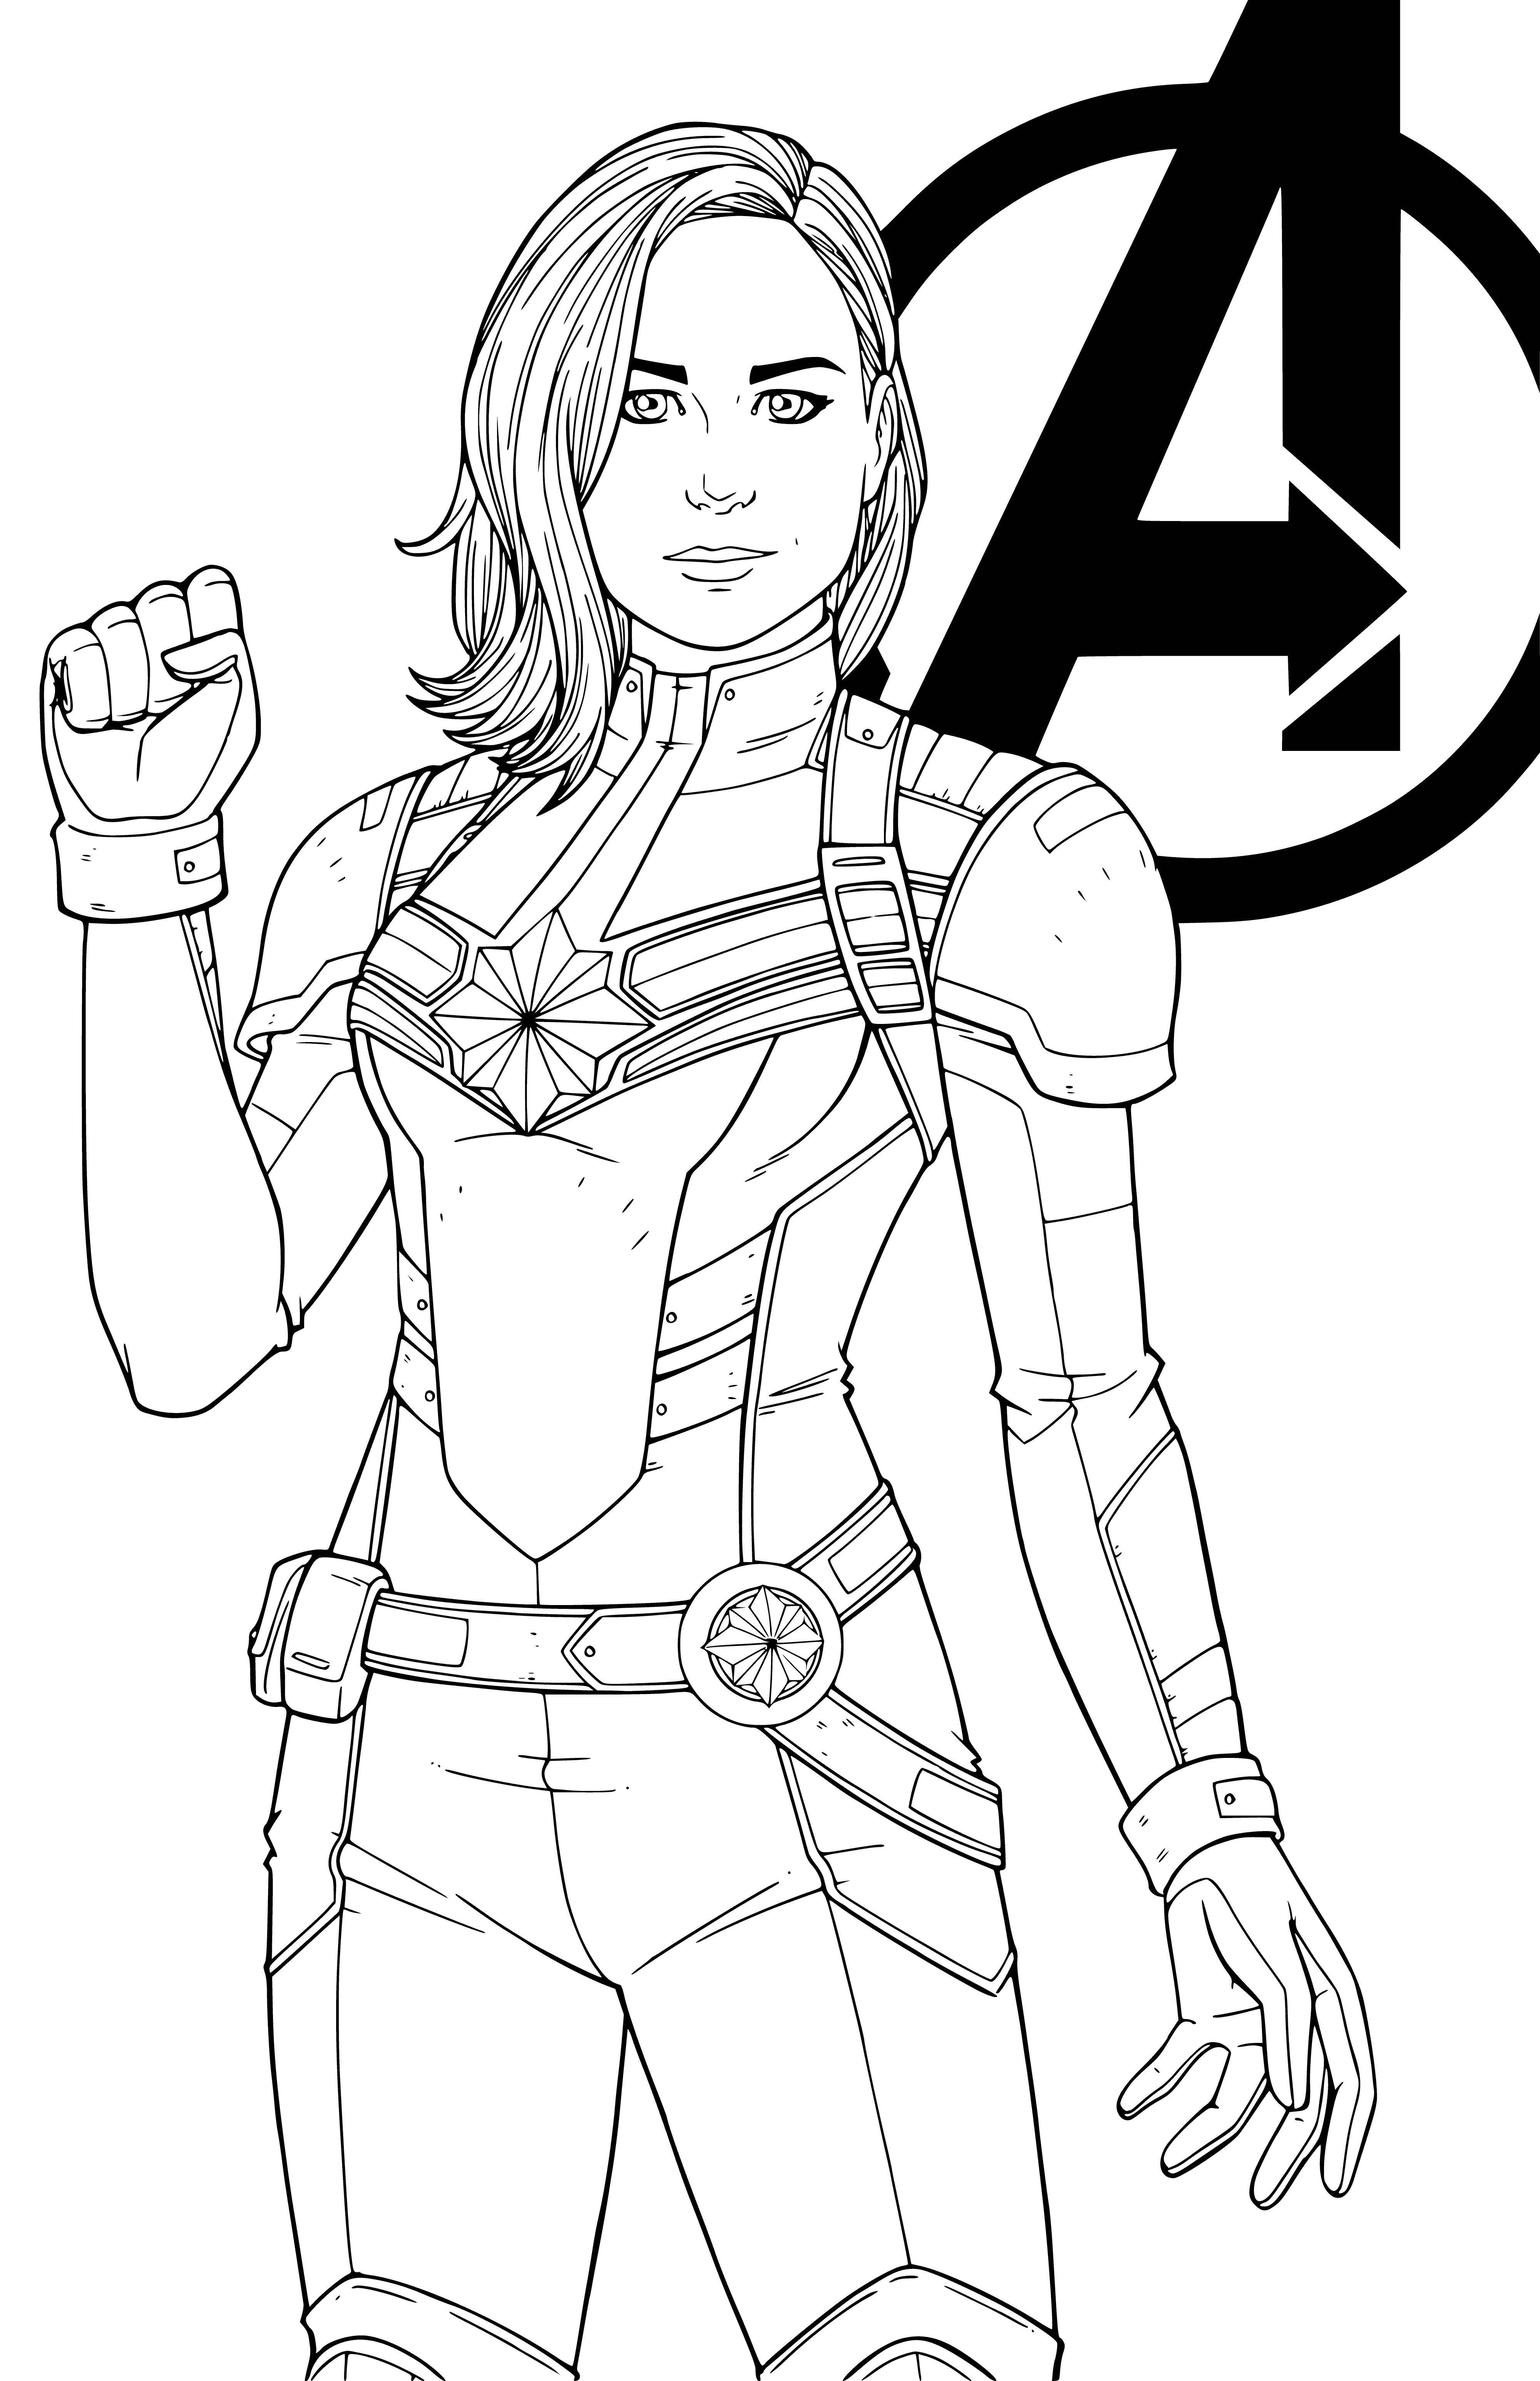 coloring page: Tall woman with red/yellow suit, cape & shield: Captain Marvel!